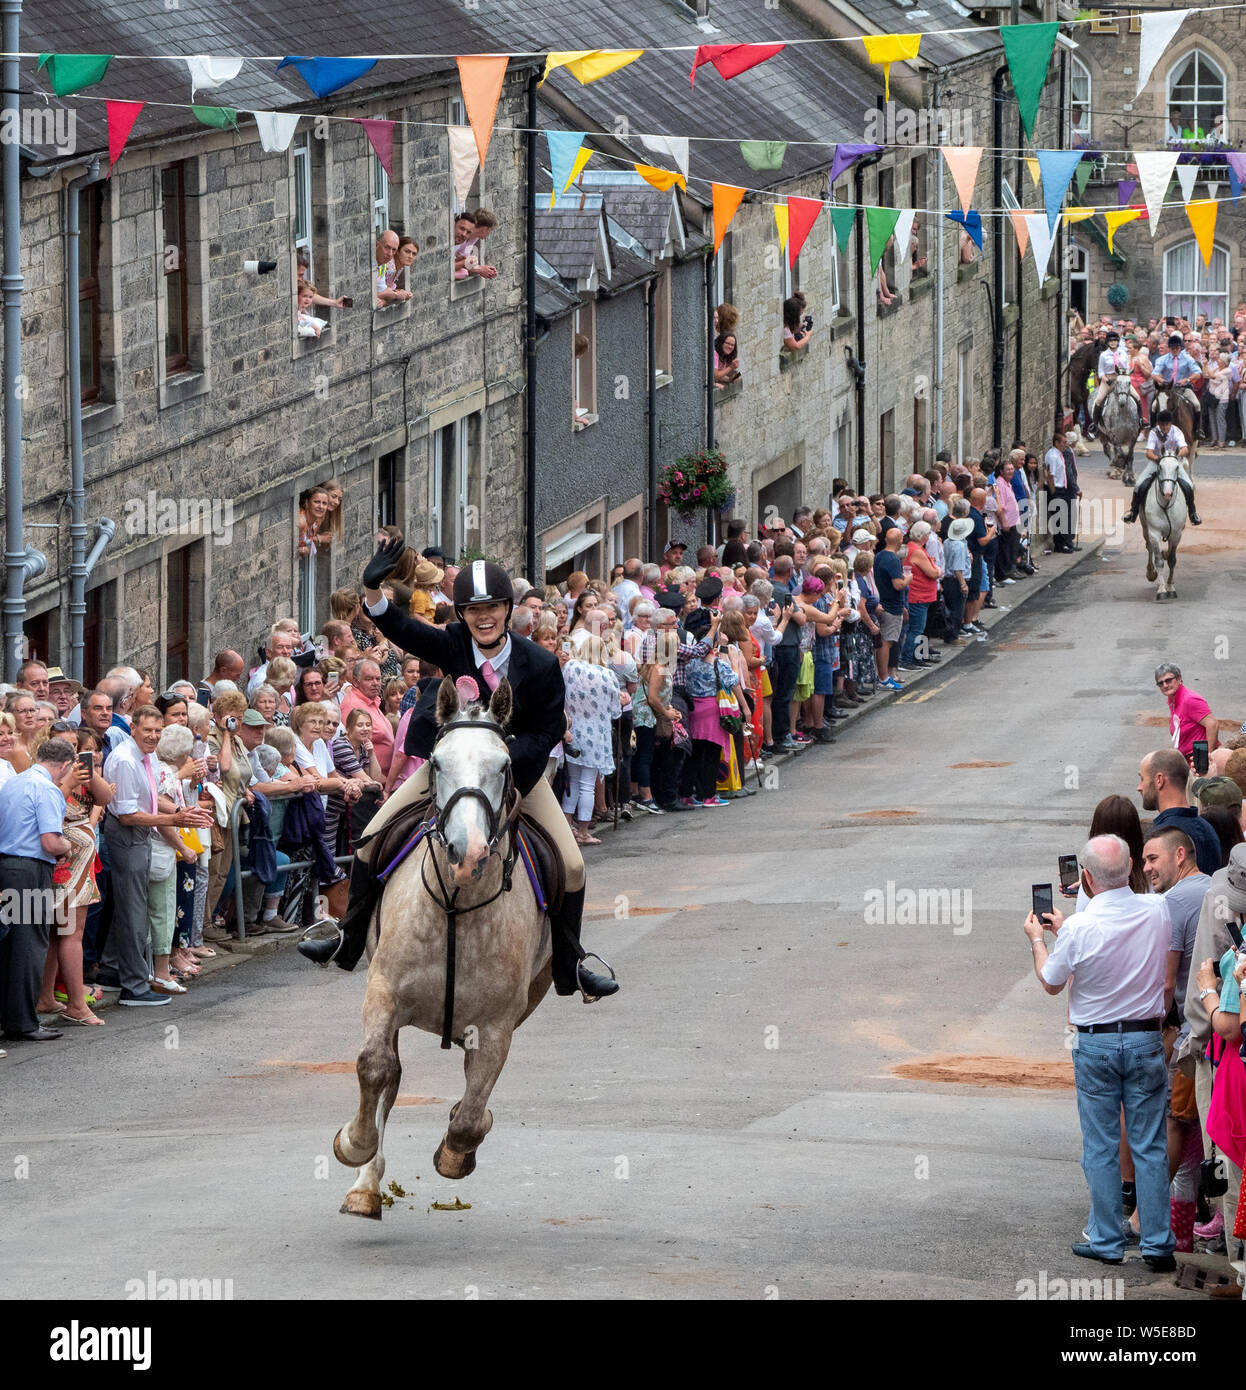 Langholm, Dumfries and Galloway, Scotland, UK. 26th July 2019. The Langholm Common Riding, annual event that takes place on the last Friday of July. Stock Photo